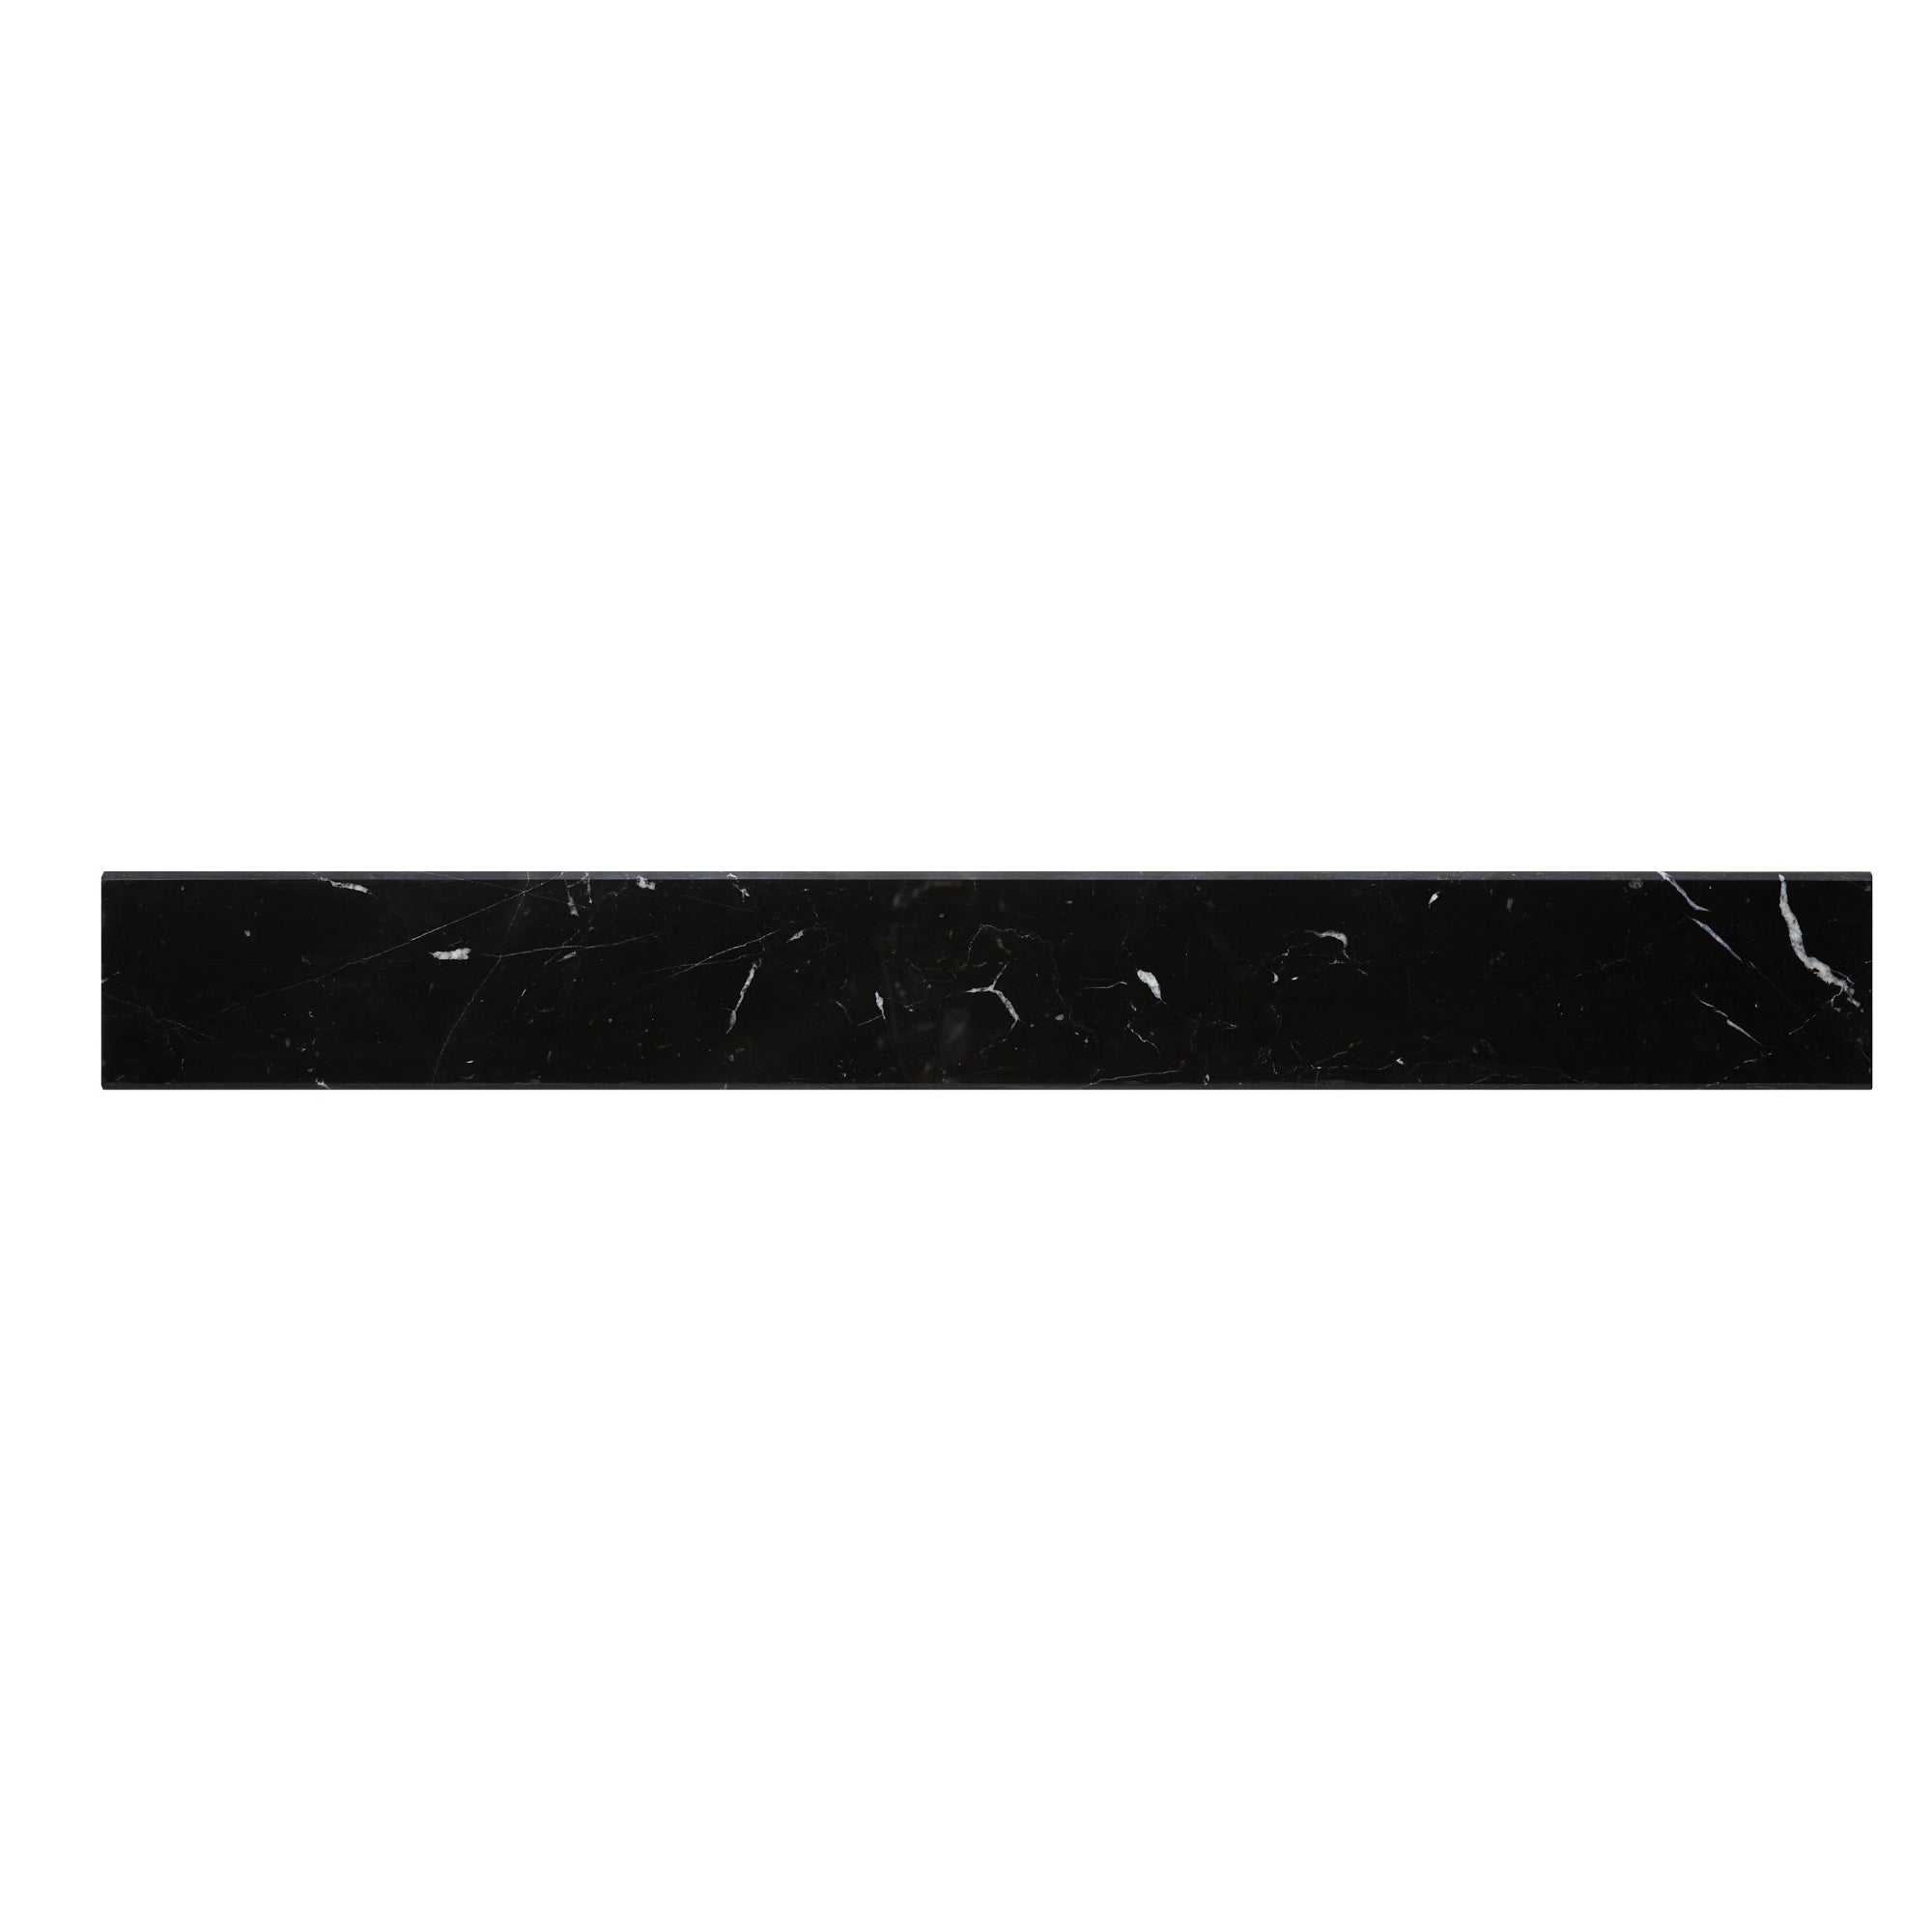 Tenedos Black Marquina 36 in. x 4-1/2 in. Polished Marble Saddle Door Threshold Floor Tile